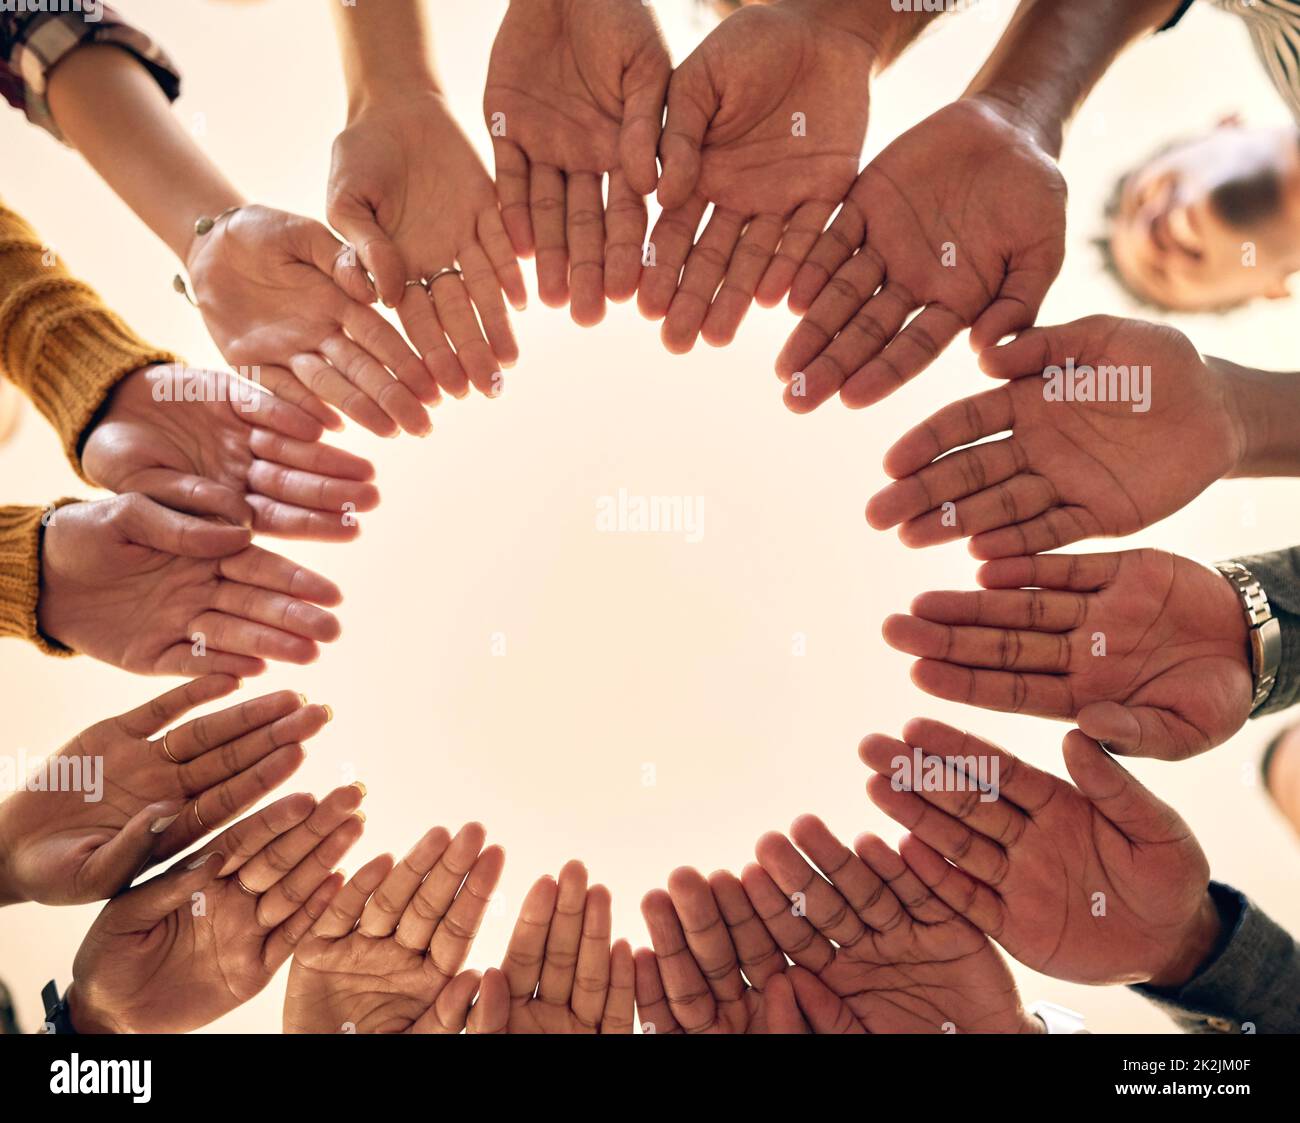 Together, we are one. Low angle shot of a group of people joining their hands together. Stock Photo